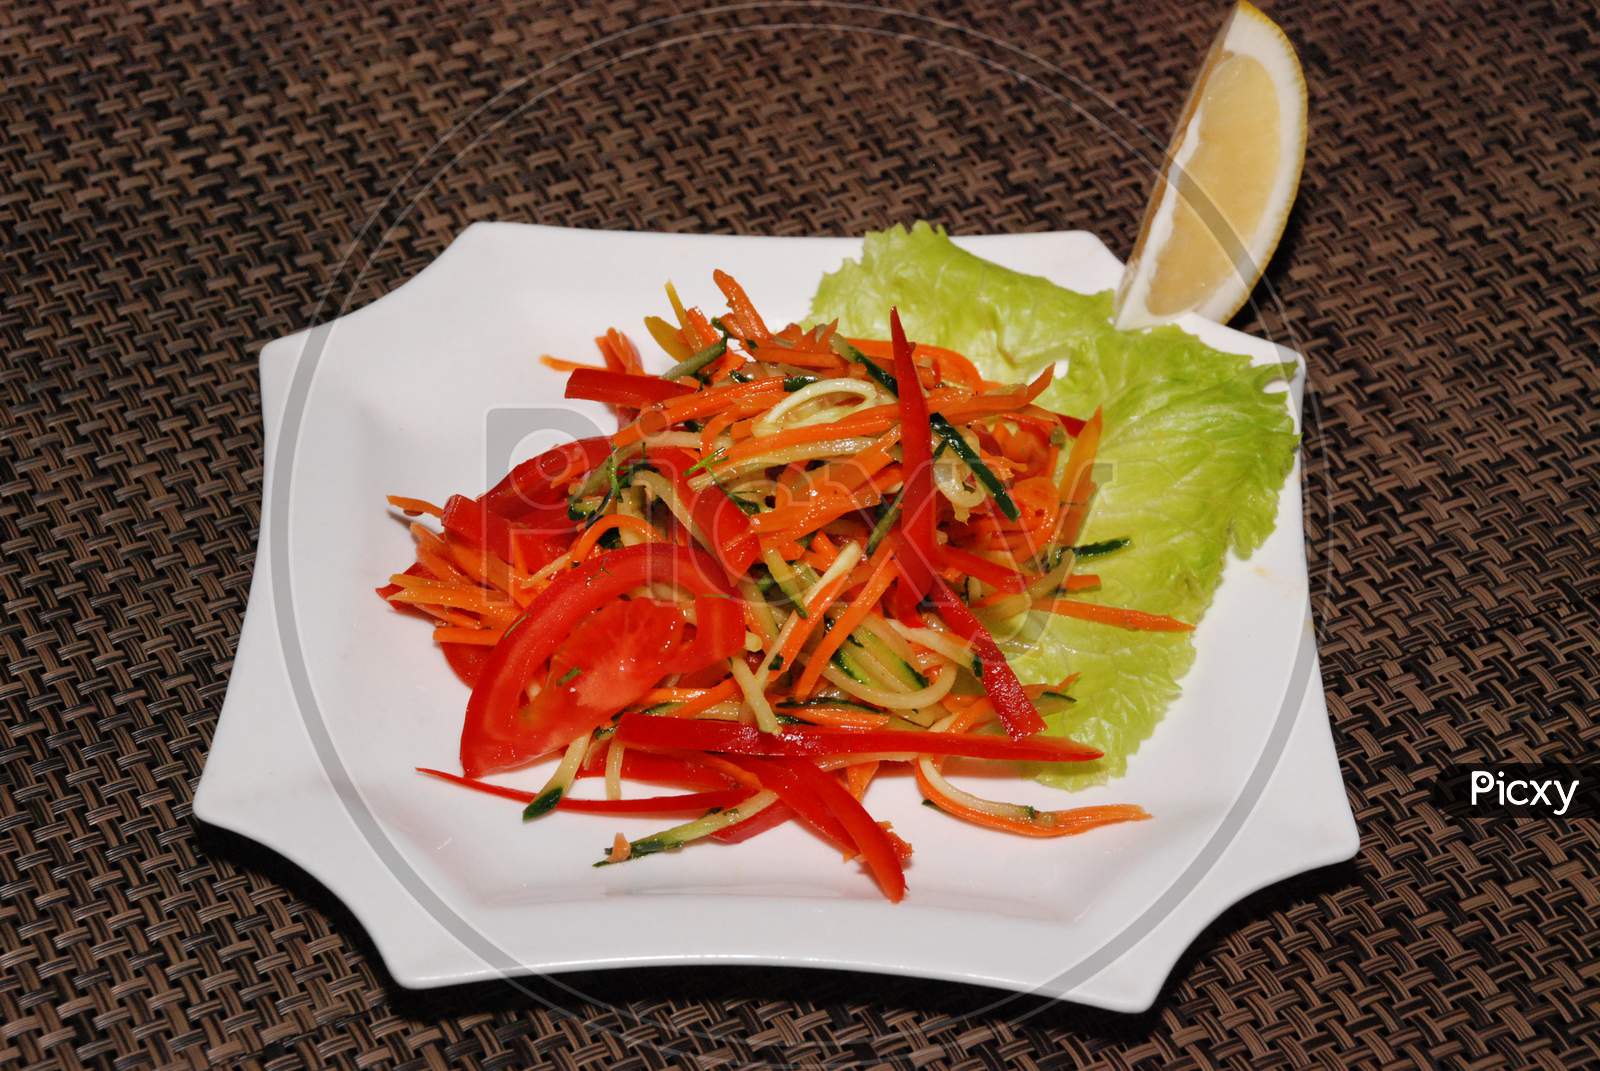 Pickled Salad With Carrot, Cucumber And Tomatoes